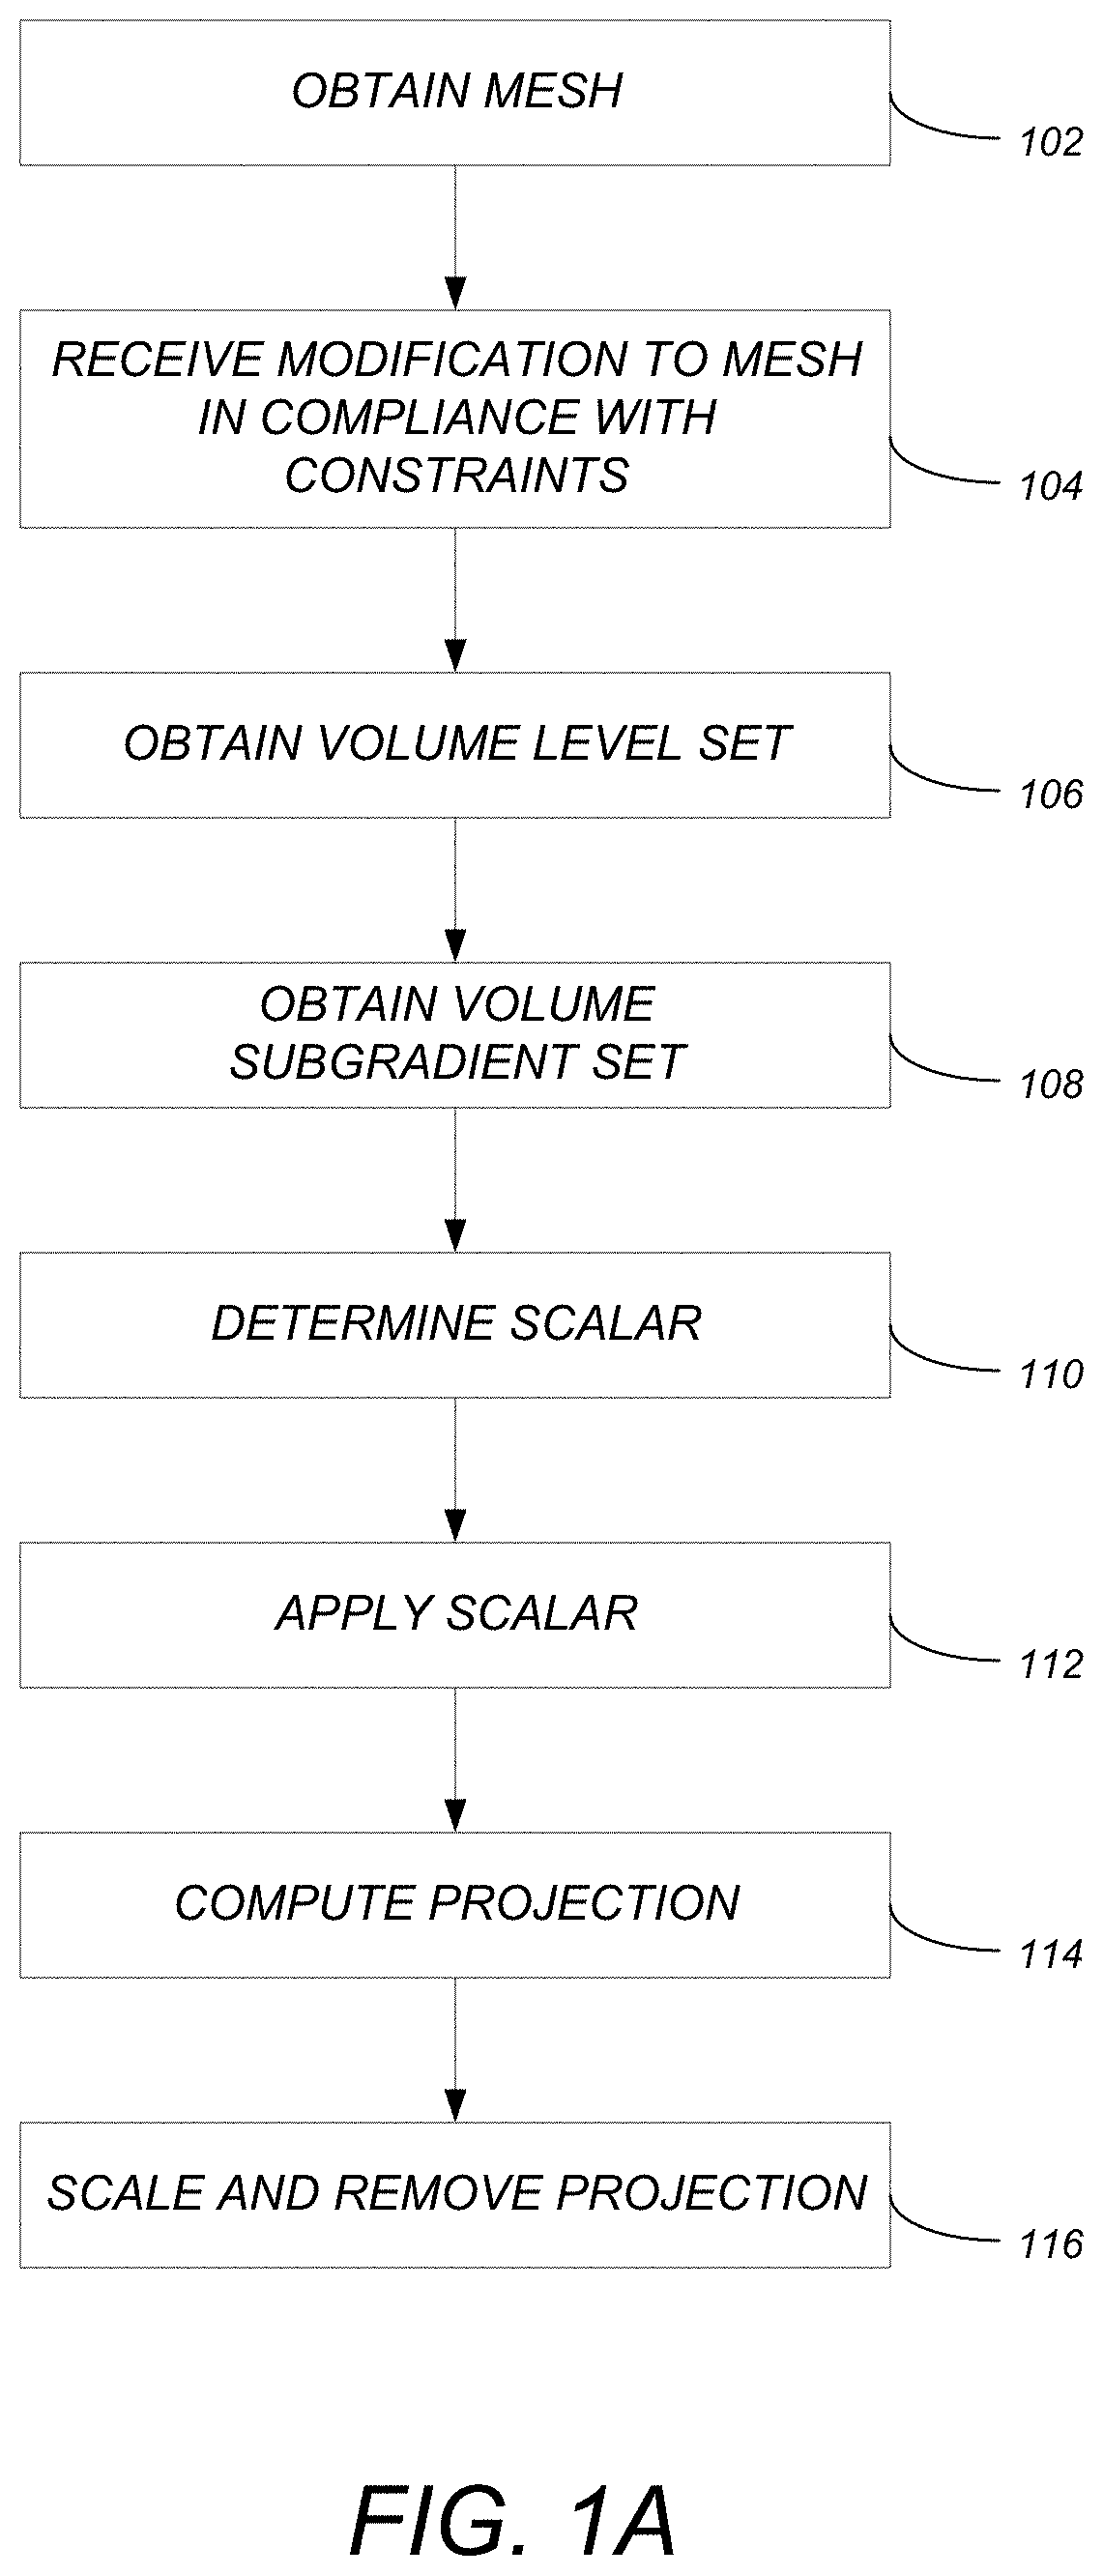 Method and system for minimizing earthwork volumes